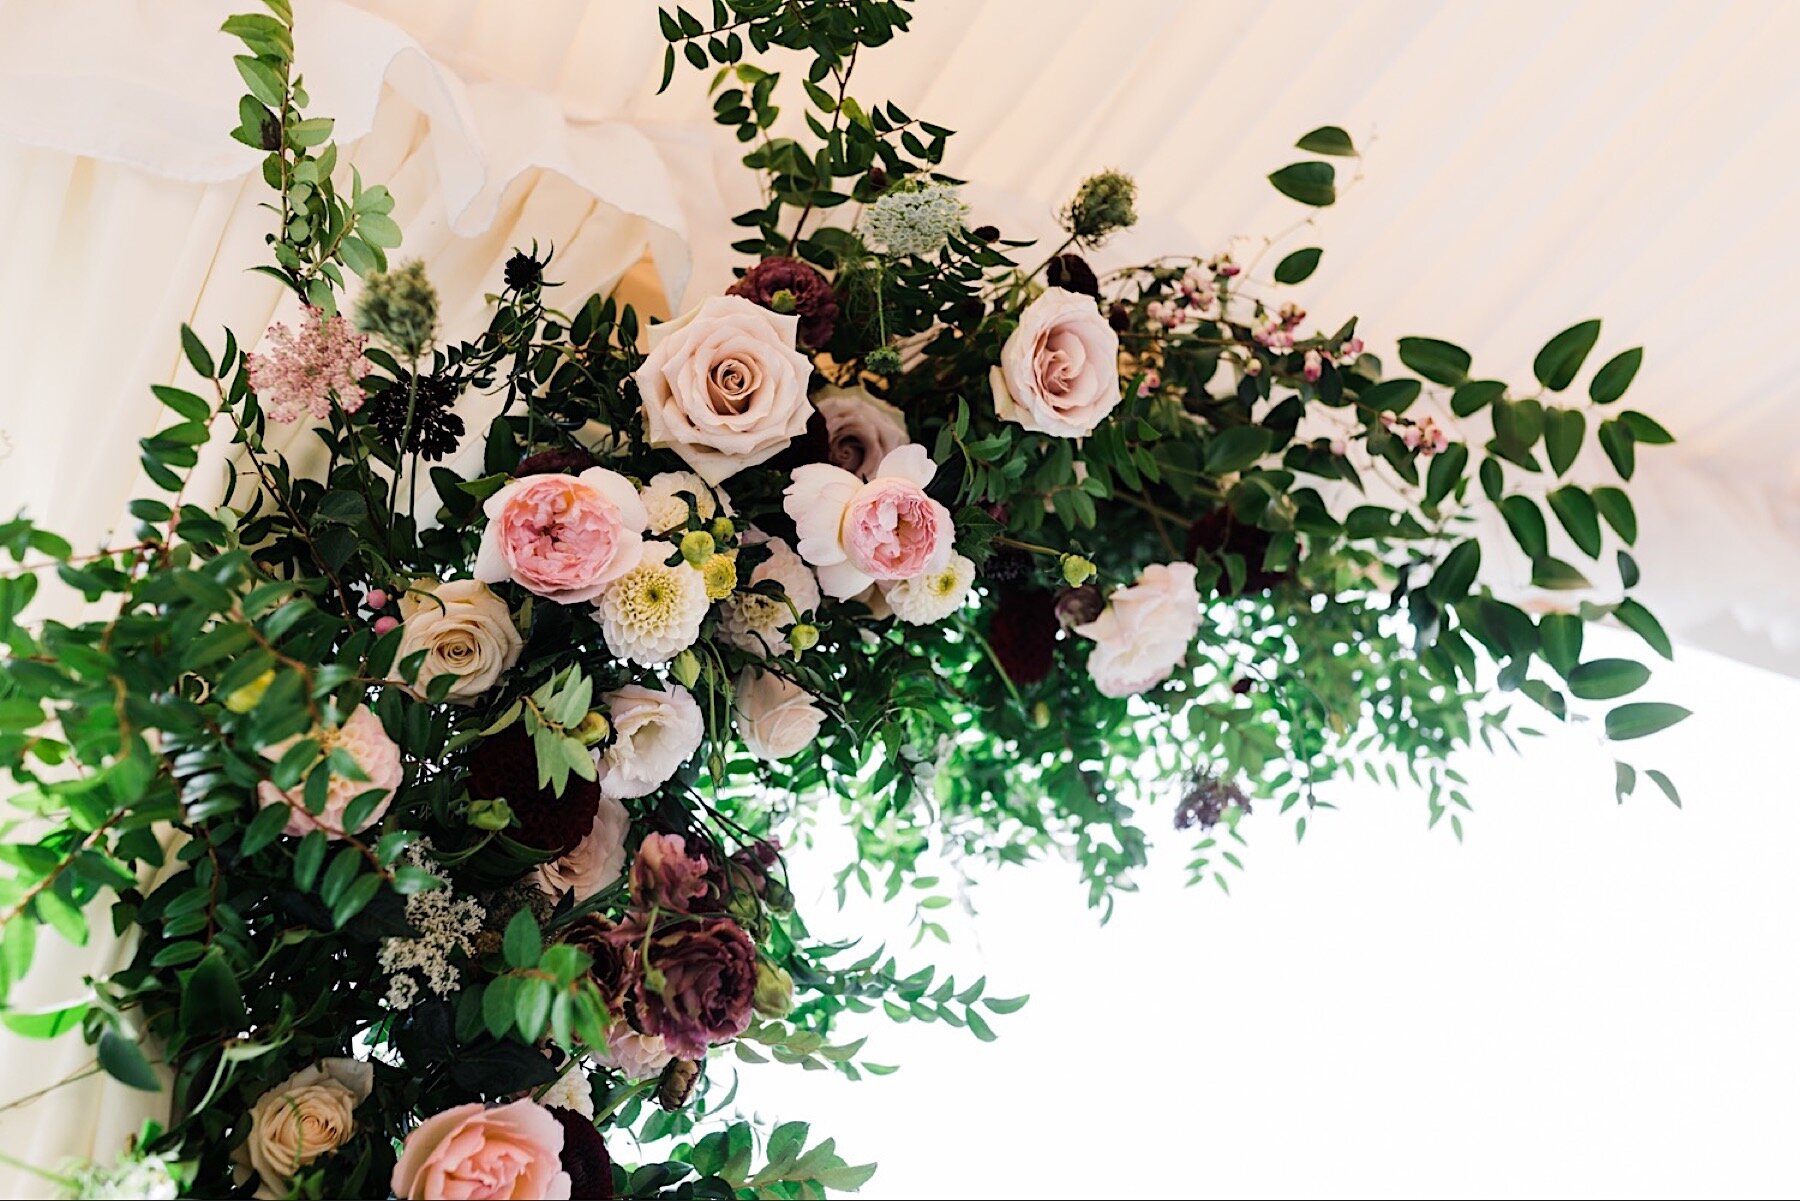 11_shaxton-ngo-234_A_Woodmark_floral_top_with_Florist_Gather_Design_from_Company_at_romantic_the_wedding_lush_Seattle_Wedding_design_Hotel.jpg